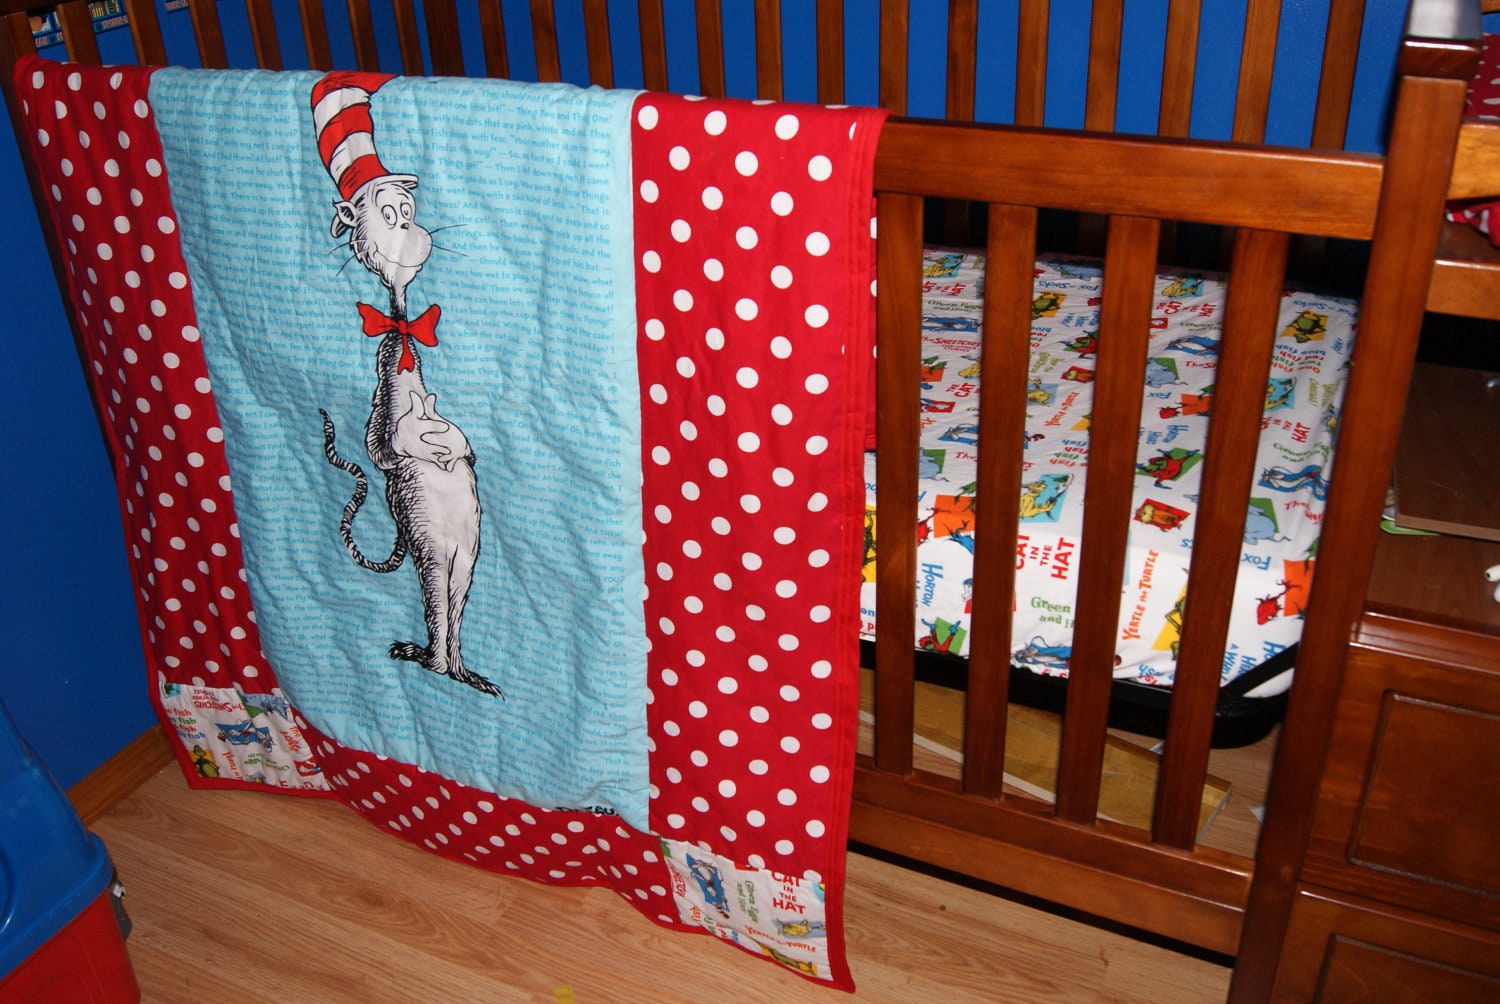 Dr Seuss Cat In The Hat Crib Bedding